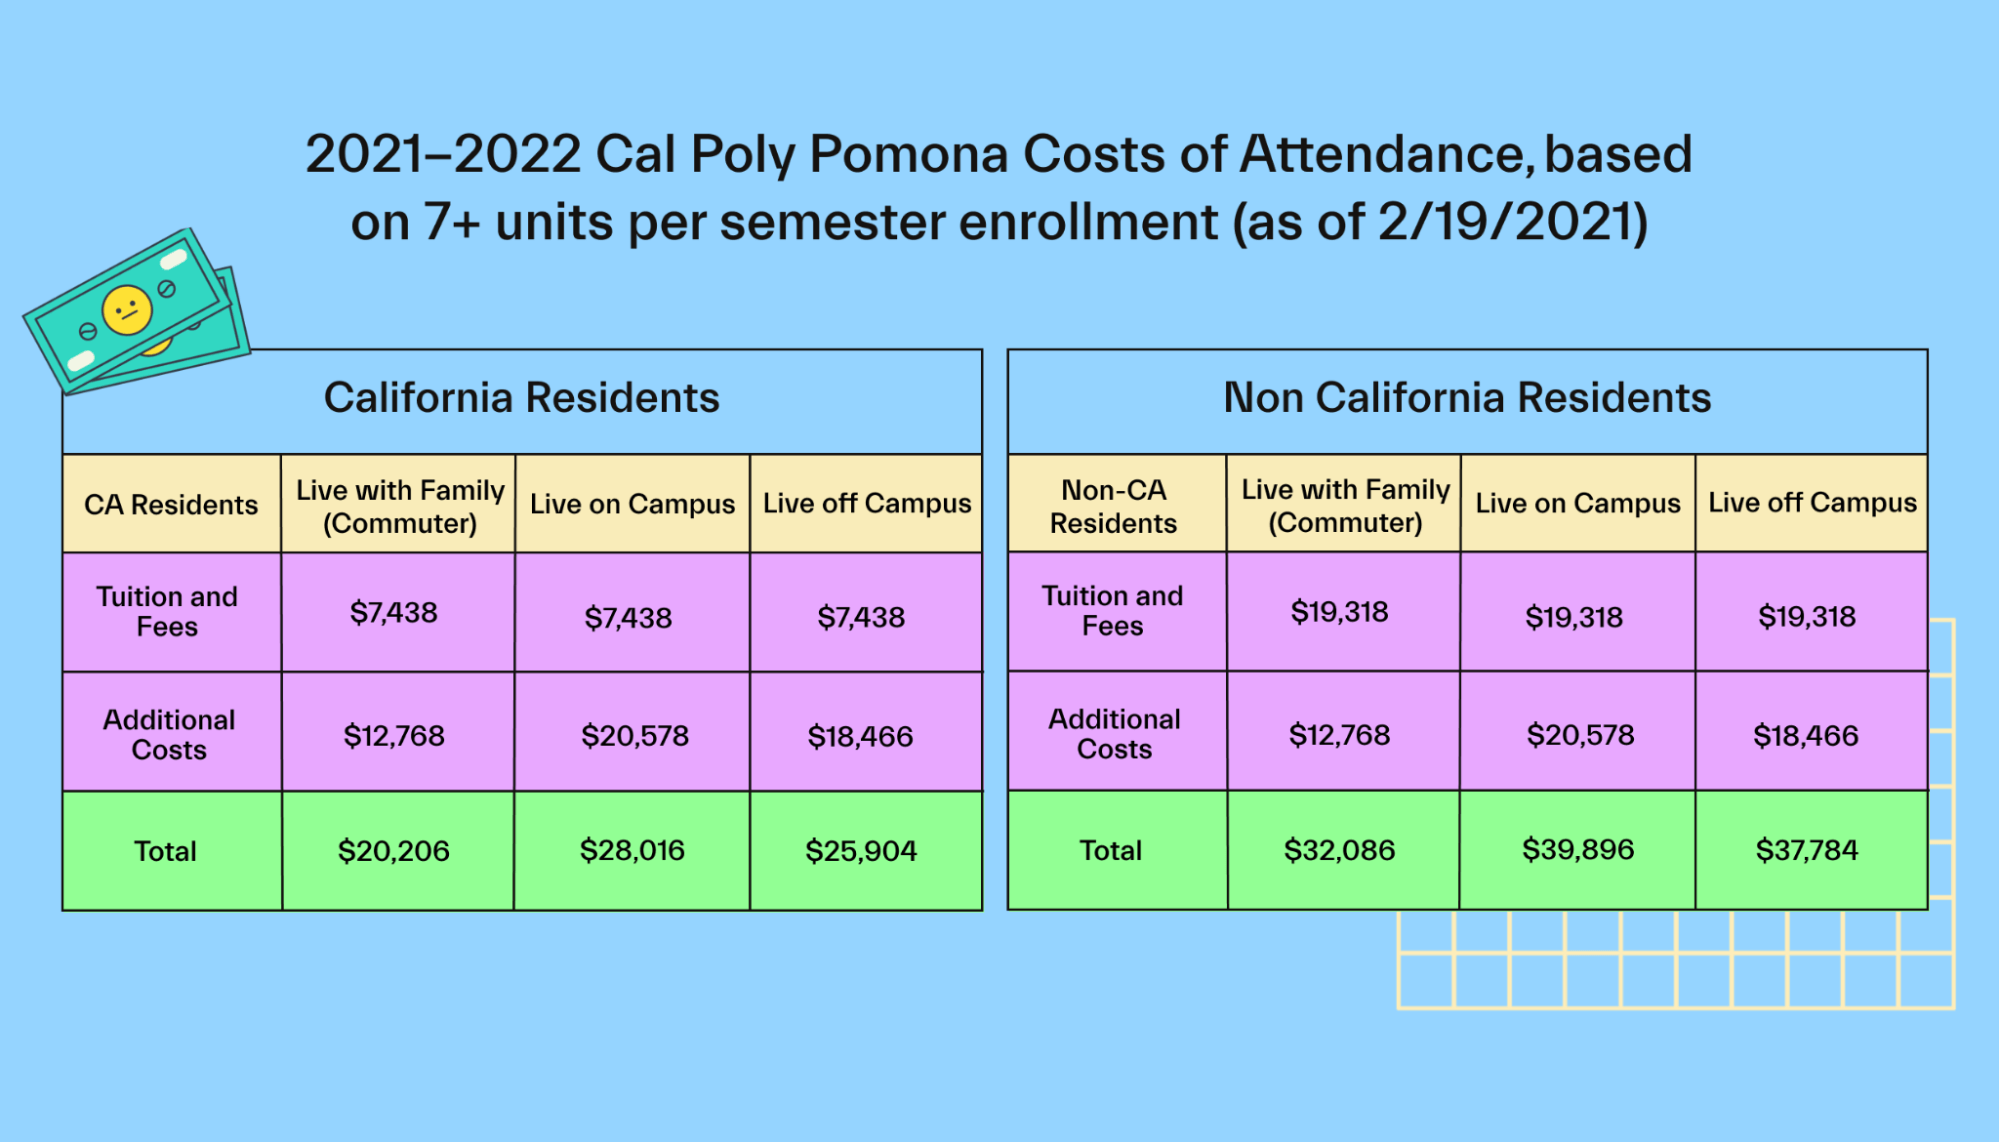 Cost of attendance